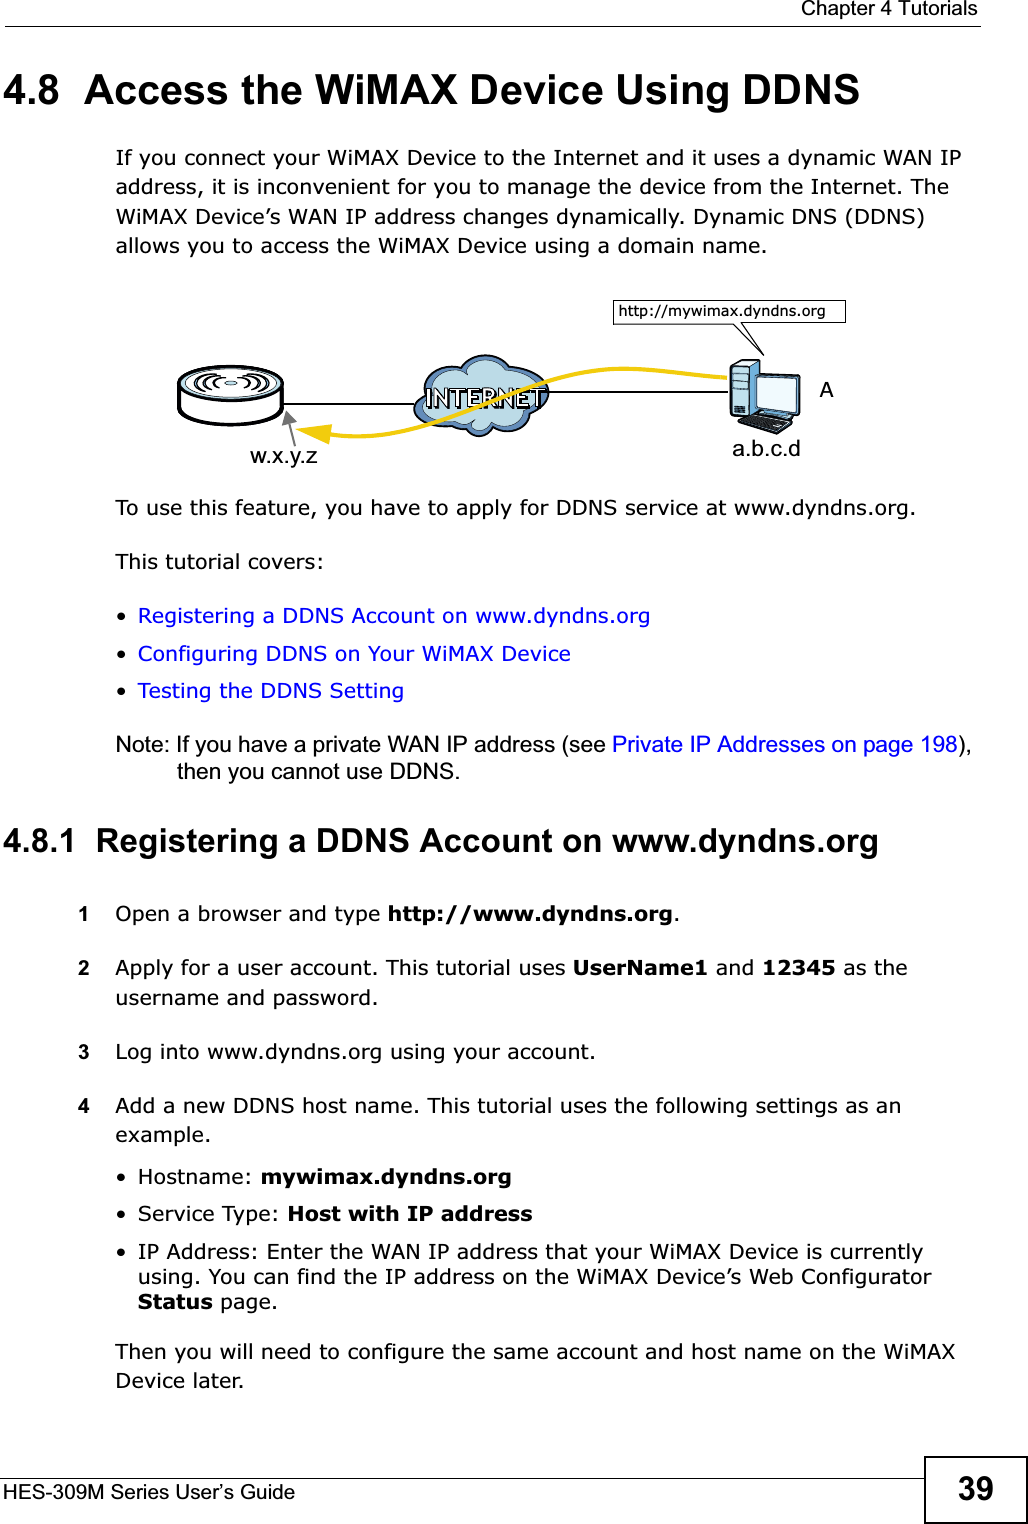  Chapter 4 TutorialsHES-309M Series User’s Guide 394.8  Access the WiMAX Device Using DDNSIf you connect your WiMAX Device to the Internet and it uses a dynamic WAN IP address, it is inconvenient for you to manage the device from the Internet. The WiMAX Device’s WAN IP address changes dynamically. Dynamic DNS (DDNS) allows you to access the WiMAX Device using a domain name. To use this feature, you have to apply for DDNS service at www.dyndns.org.This tutorial covers:•Registering a DDNS Account on www.dyndns.org•Configuring DDNS on Your WiMAX Device•Testing the DDNS SettingNote: If you have a private WAN IP address (see Private IP Addresses on page 198),then you cannot use DDNS.4.8.1  Registering a DDNS Account on www.dyndns.org1Open a browser and type http://www.dyndns.org.2Apply for a user account. This tutorial uses UserName1 and 12345 as the username and password.3Log into www.dyndns.org using your account.4Add a new DDNS host name. This tutorial uses the following settings as an example.• Hostname: mywimax.dyndns.org•Service Type: Host with IP address• IP Address: Enter the WAN IP address that your WiMAX Device is currently using. You can find the IP address on the WiMAX Device’s Web Configurator Status page.Then you will need to configure the same account and host name on the WiMAX Device later.w.x.y.z a.b.c.dhttp://mywimax.dyndns.orgA